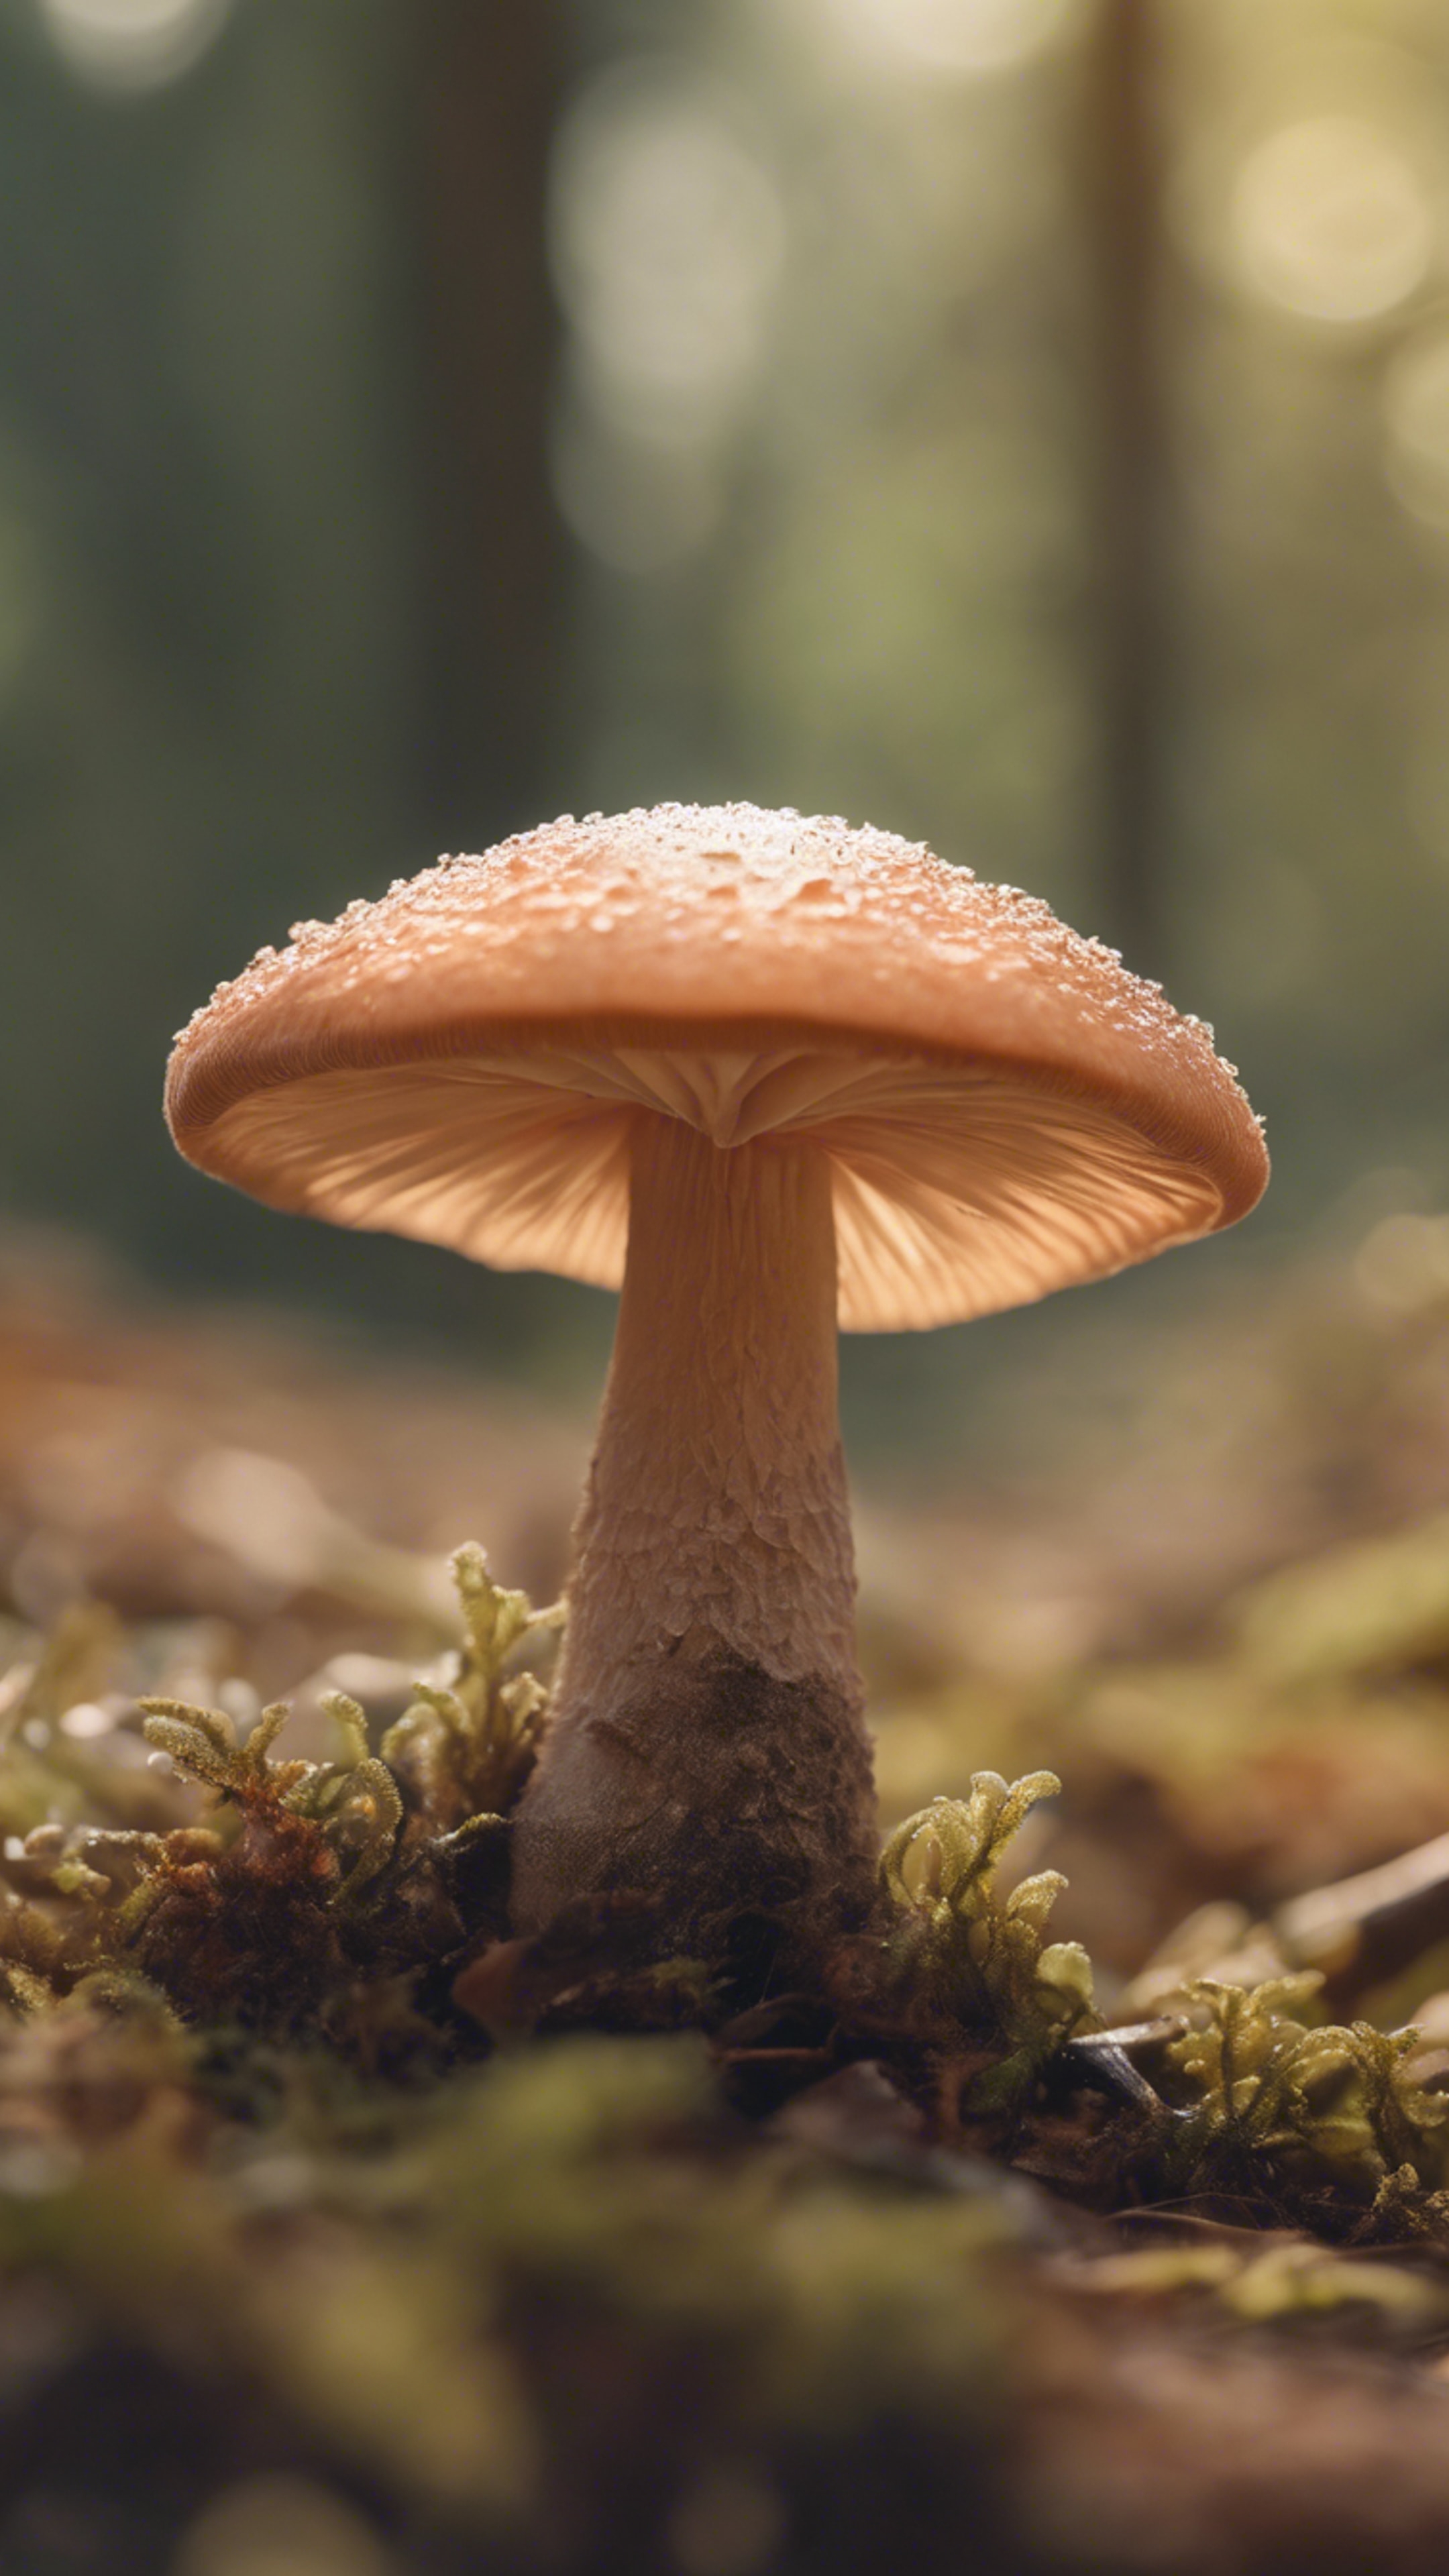 A close-up of a small, cute mushroom, peach color, with soft, sunlit forest scenery in the background. Wallpaper[125df3bad49b42d8bf38]